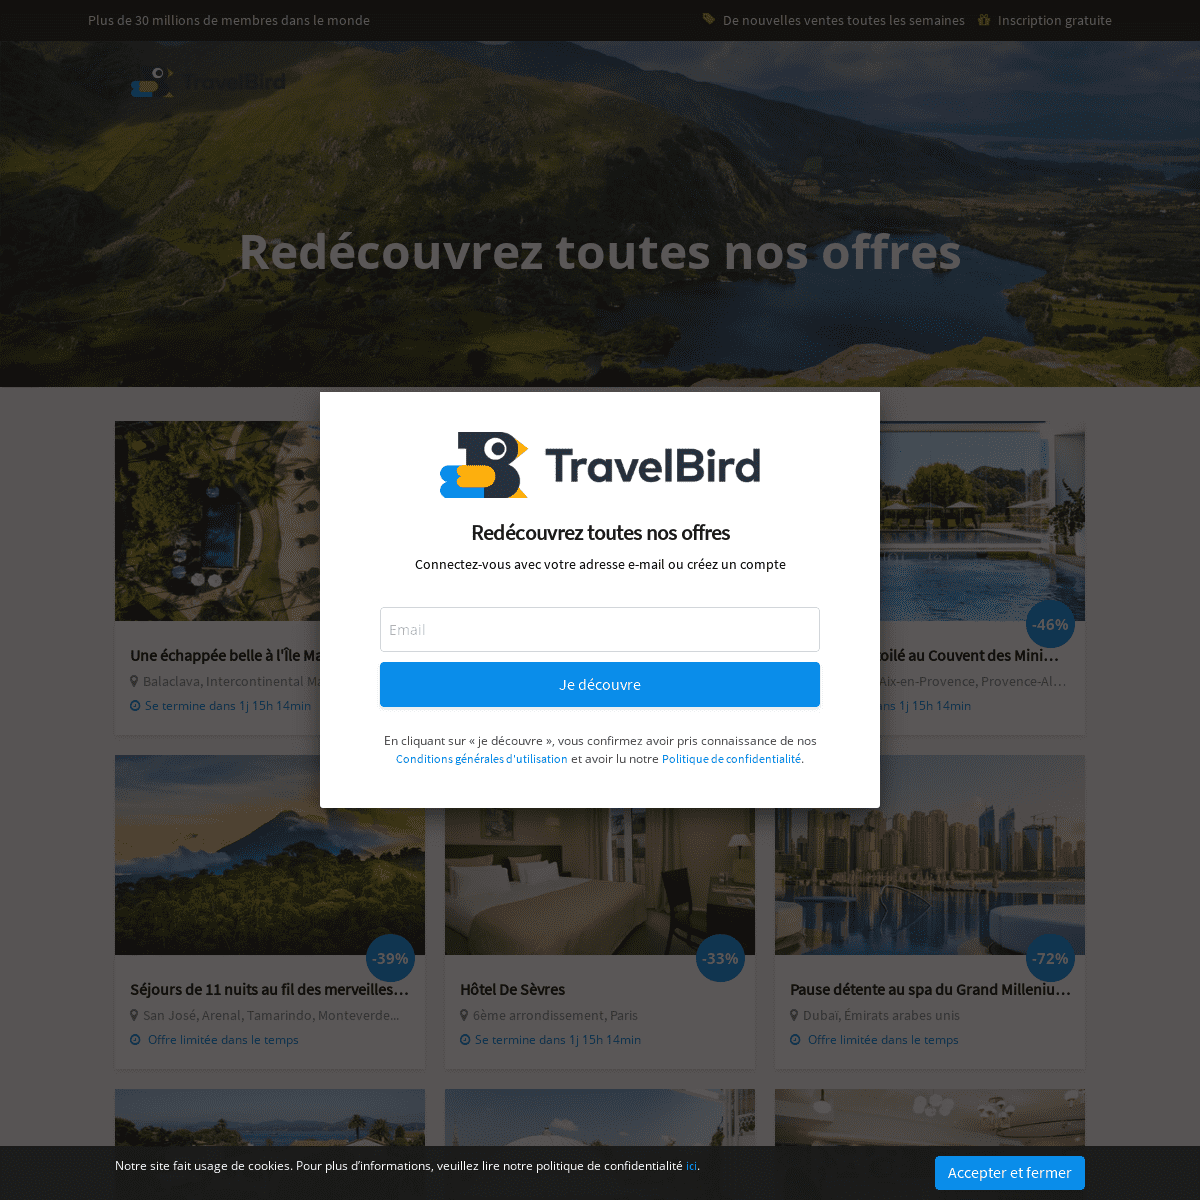 A complete backup of travelbird.fr